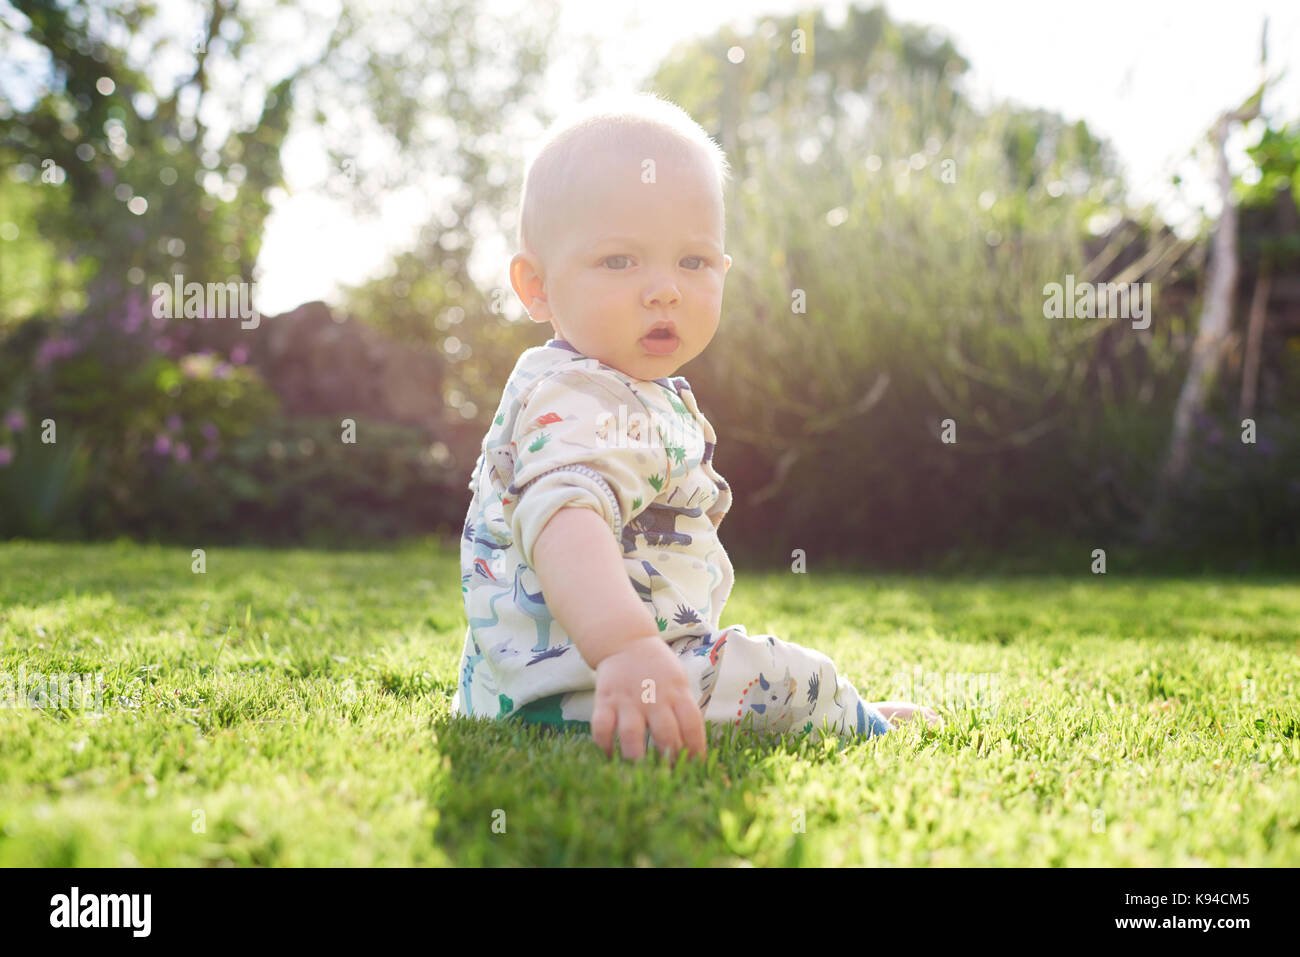 Portrait of a very young baby wearing a colourful onsey in the garden with lovely sunlight and greenery surrounding his serene situation in life. Stock Photo